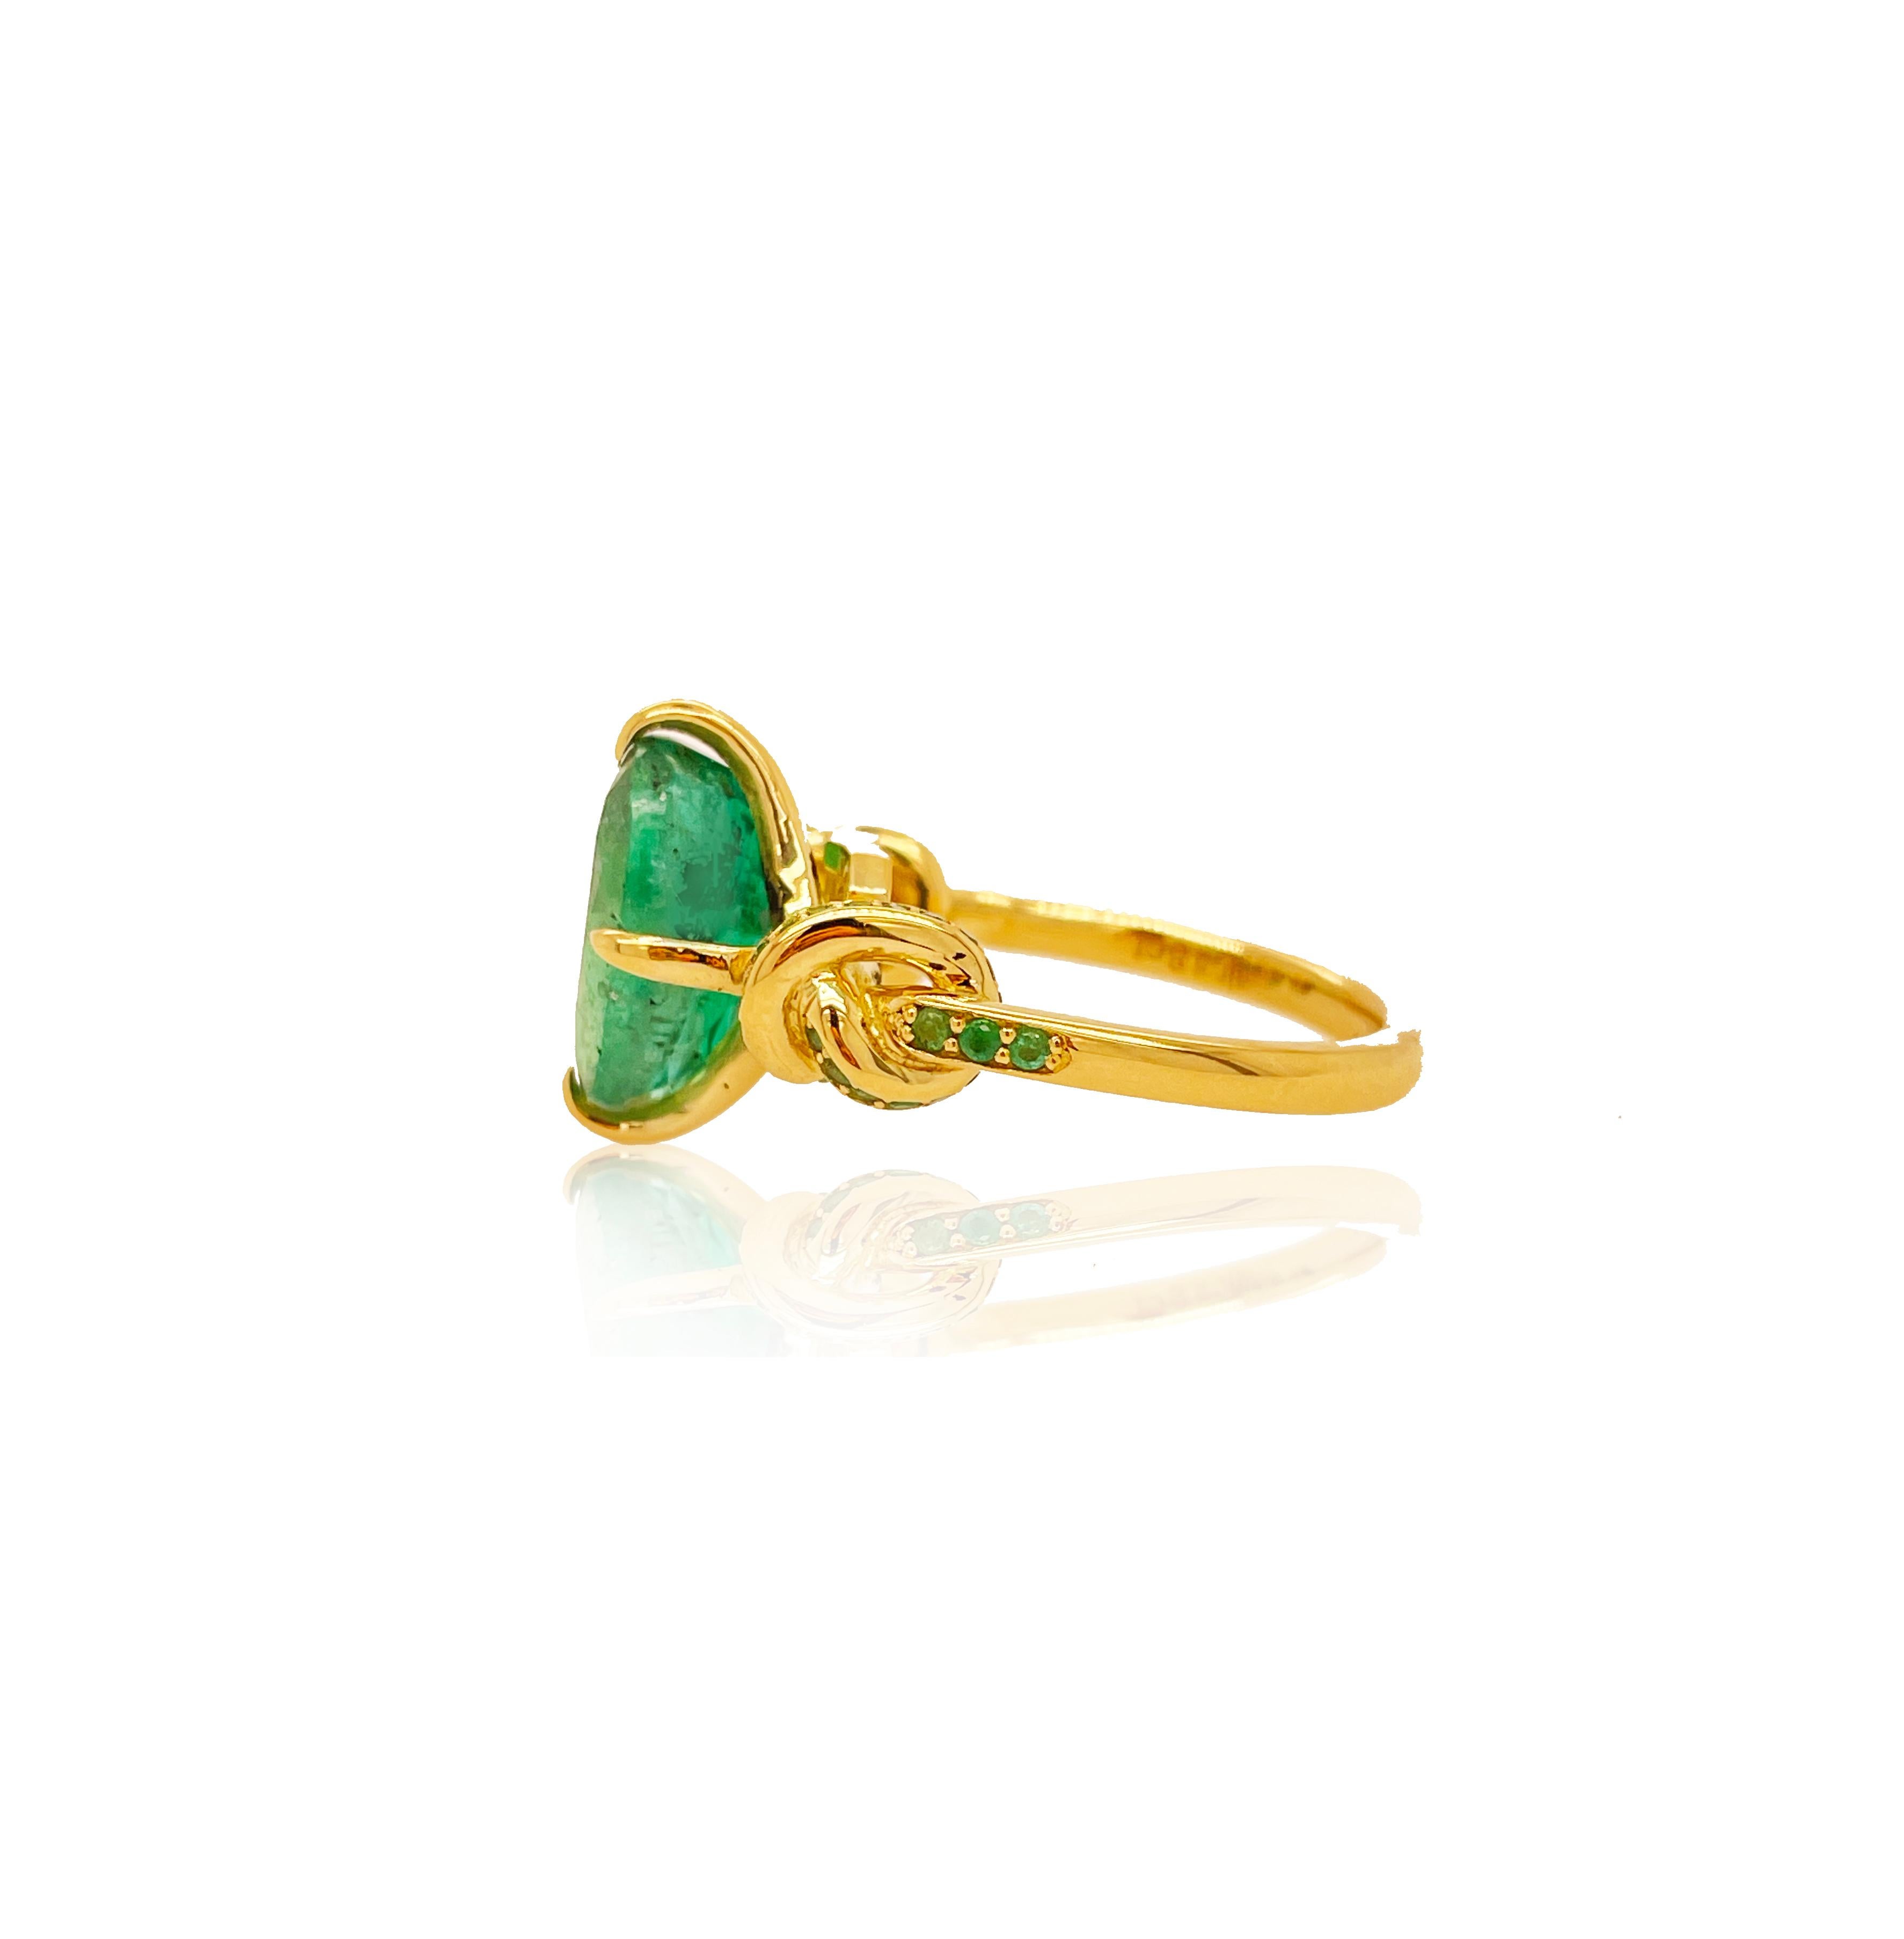 4.01ct Emerald Oval Cut Forget Me Knot Ring in 18Carat Yellow Gold with Emeralds For Sale 3